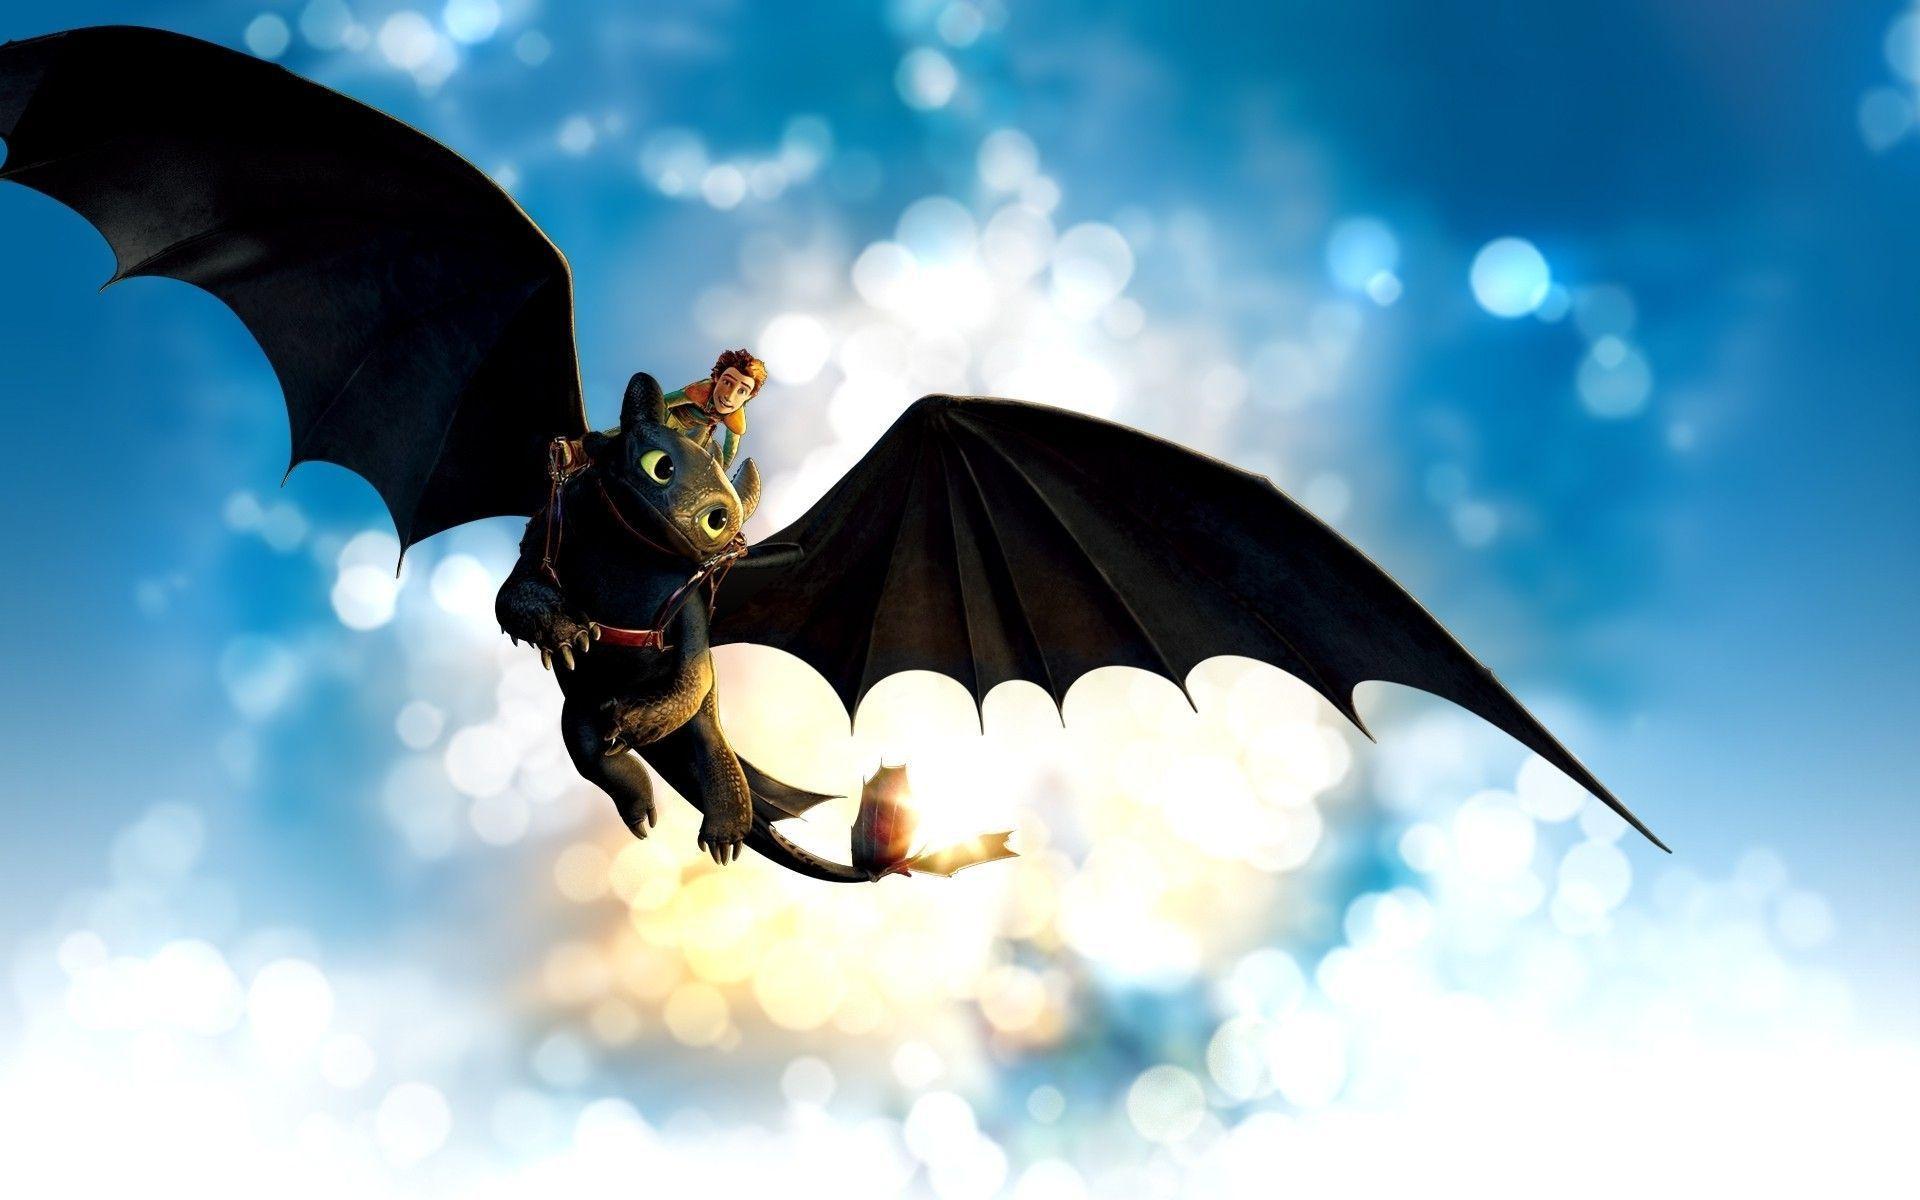 How To Train Your Dragon, Hiccup, Toothless Wallpaper HD